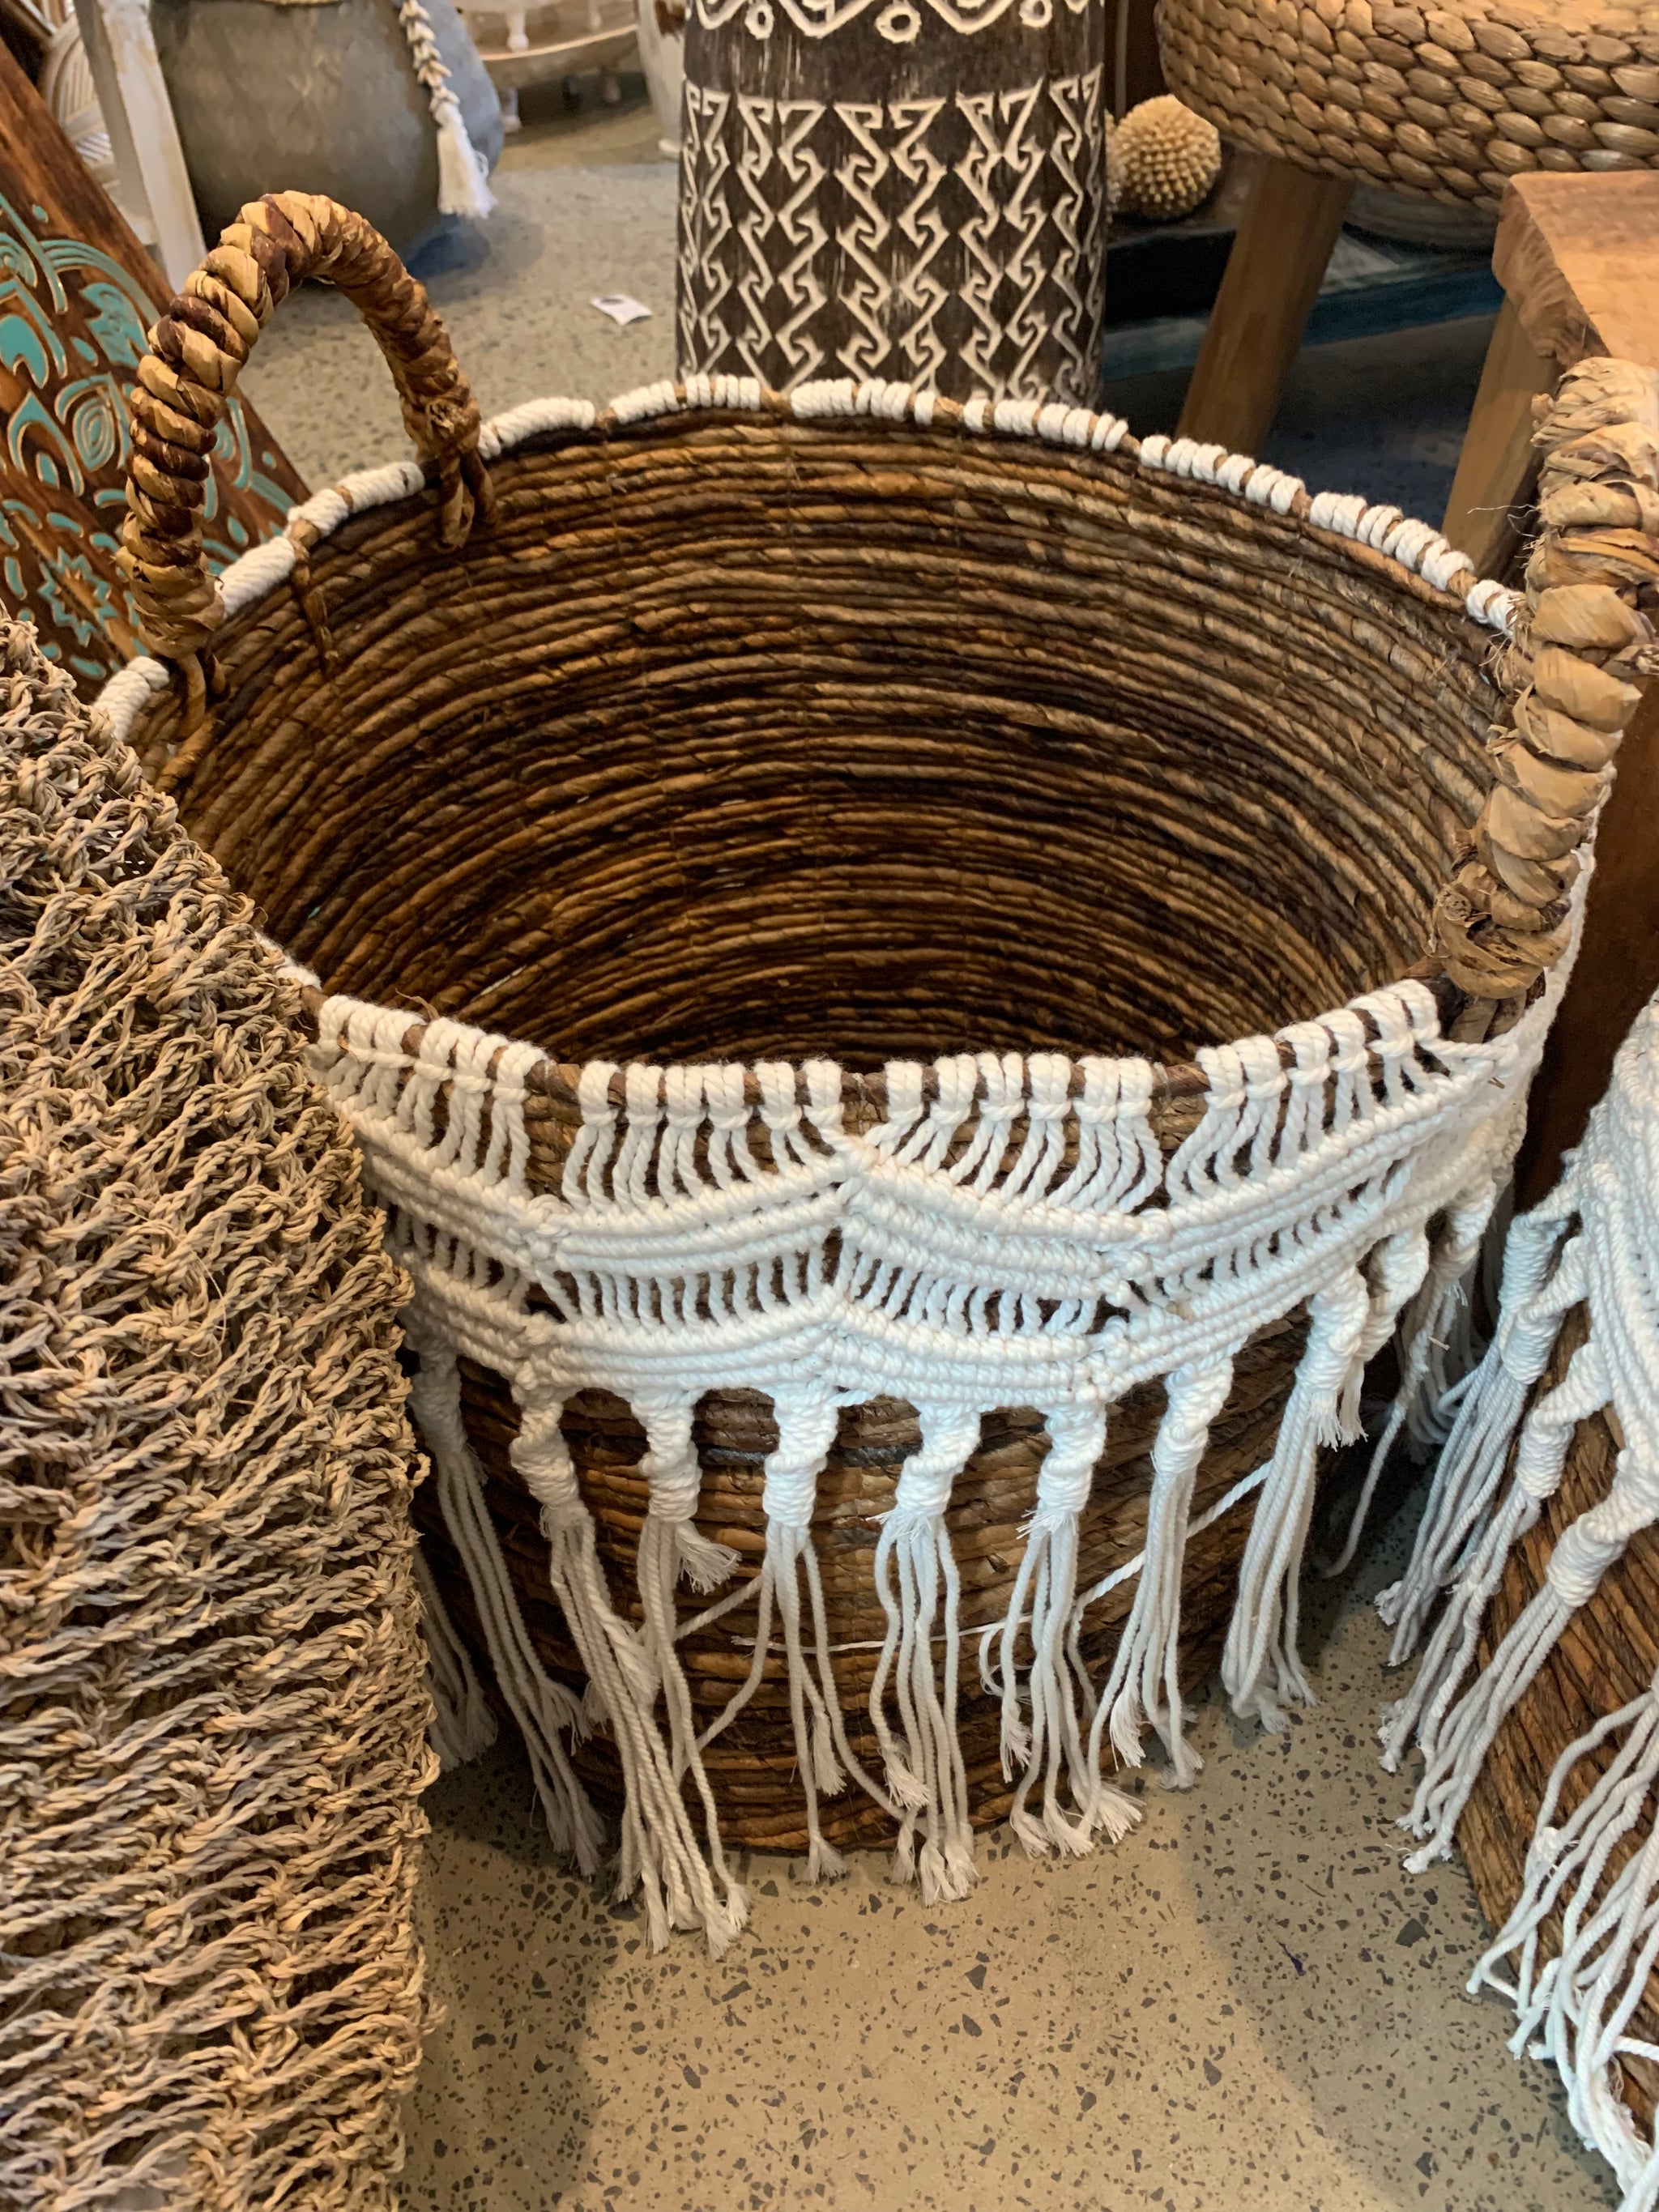 Woven basket with macrame. L